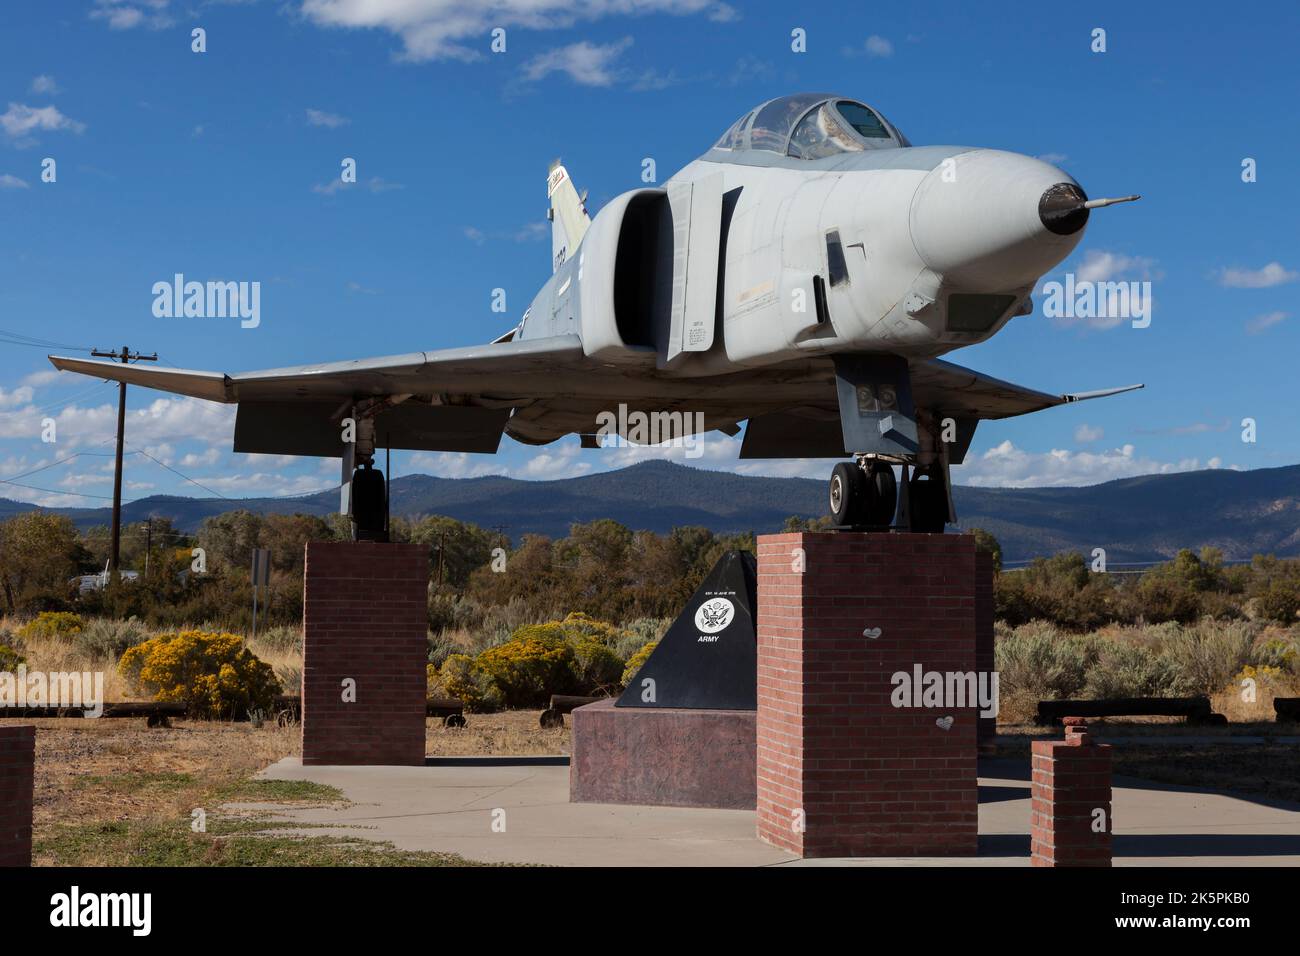 Mcdonnel Douglgas RF-4C Phantom II, USAF serial number 64-1022, formerly of the Nevada Air National Guard's 192nd Tactical Reconnaissance Squadron Hig Stock Photo